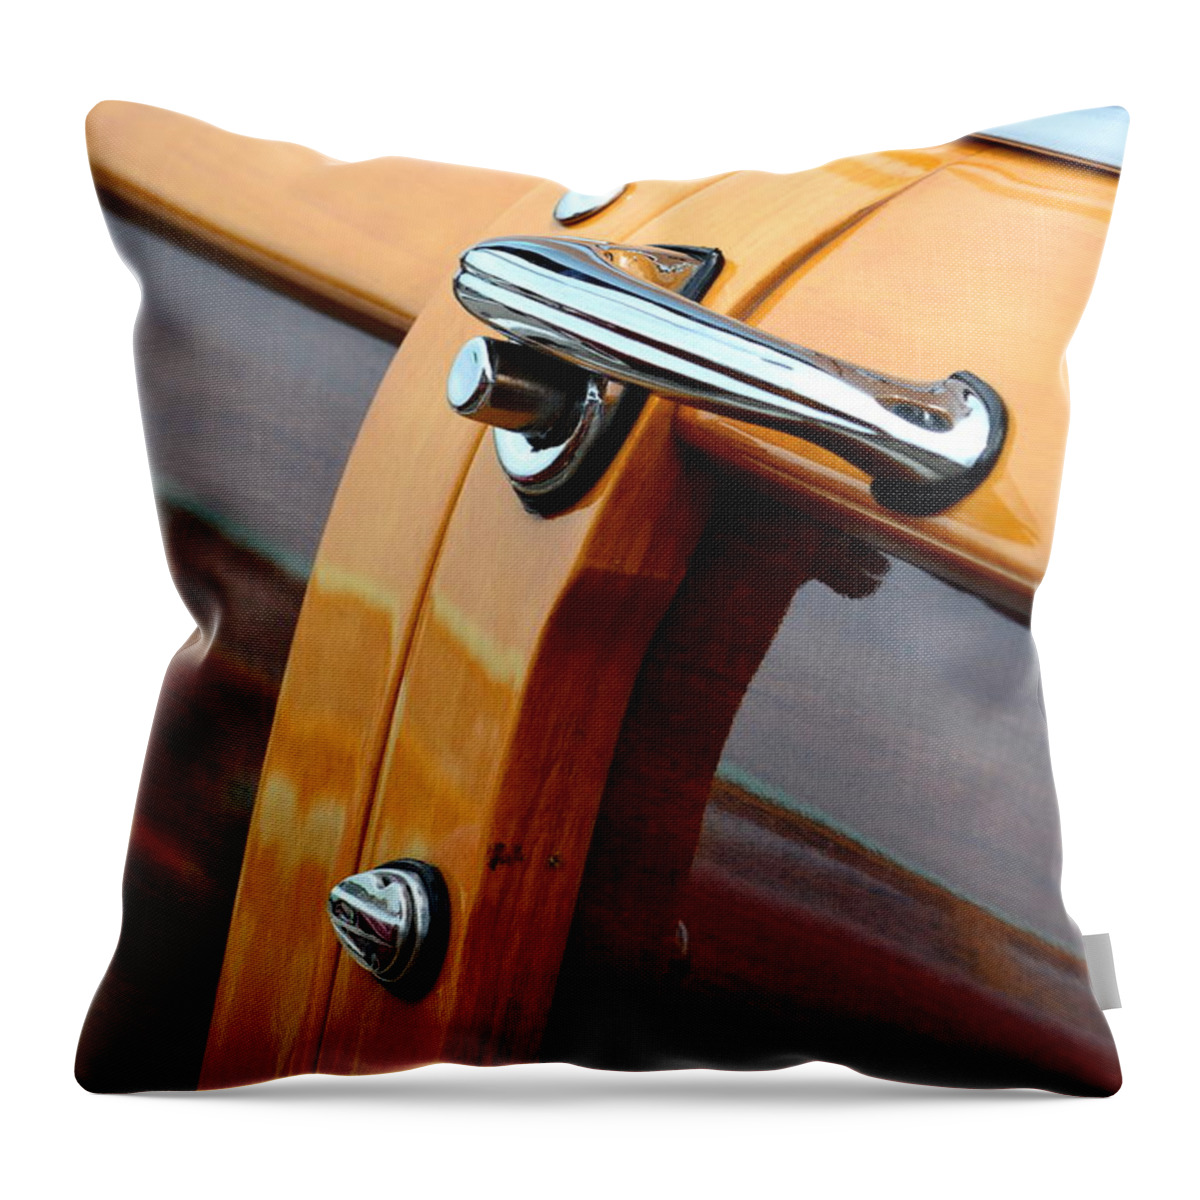  Throw Pillow featuring the photograph Woodie Handle by Dean Ferreira